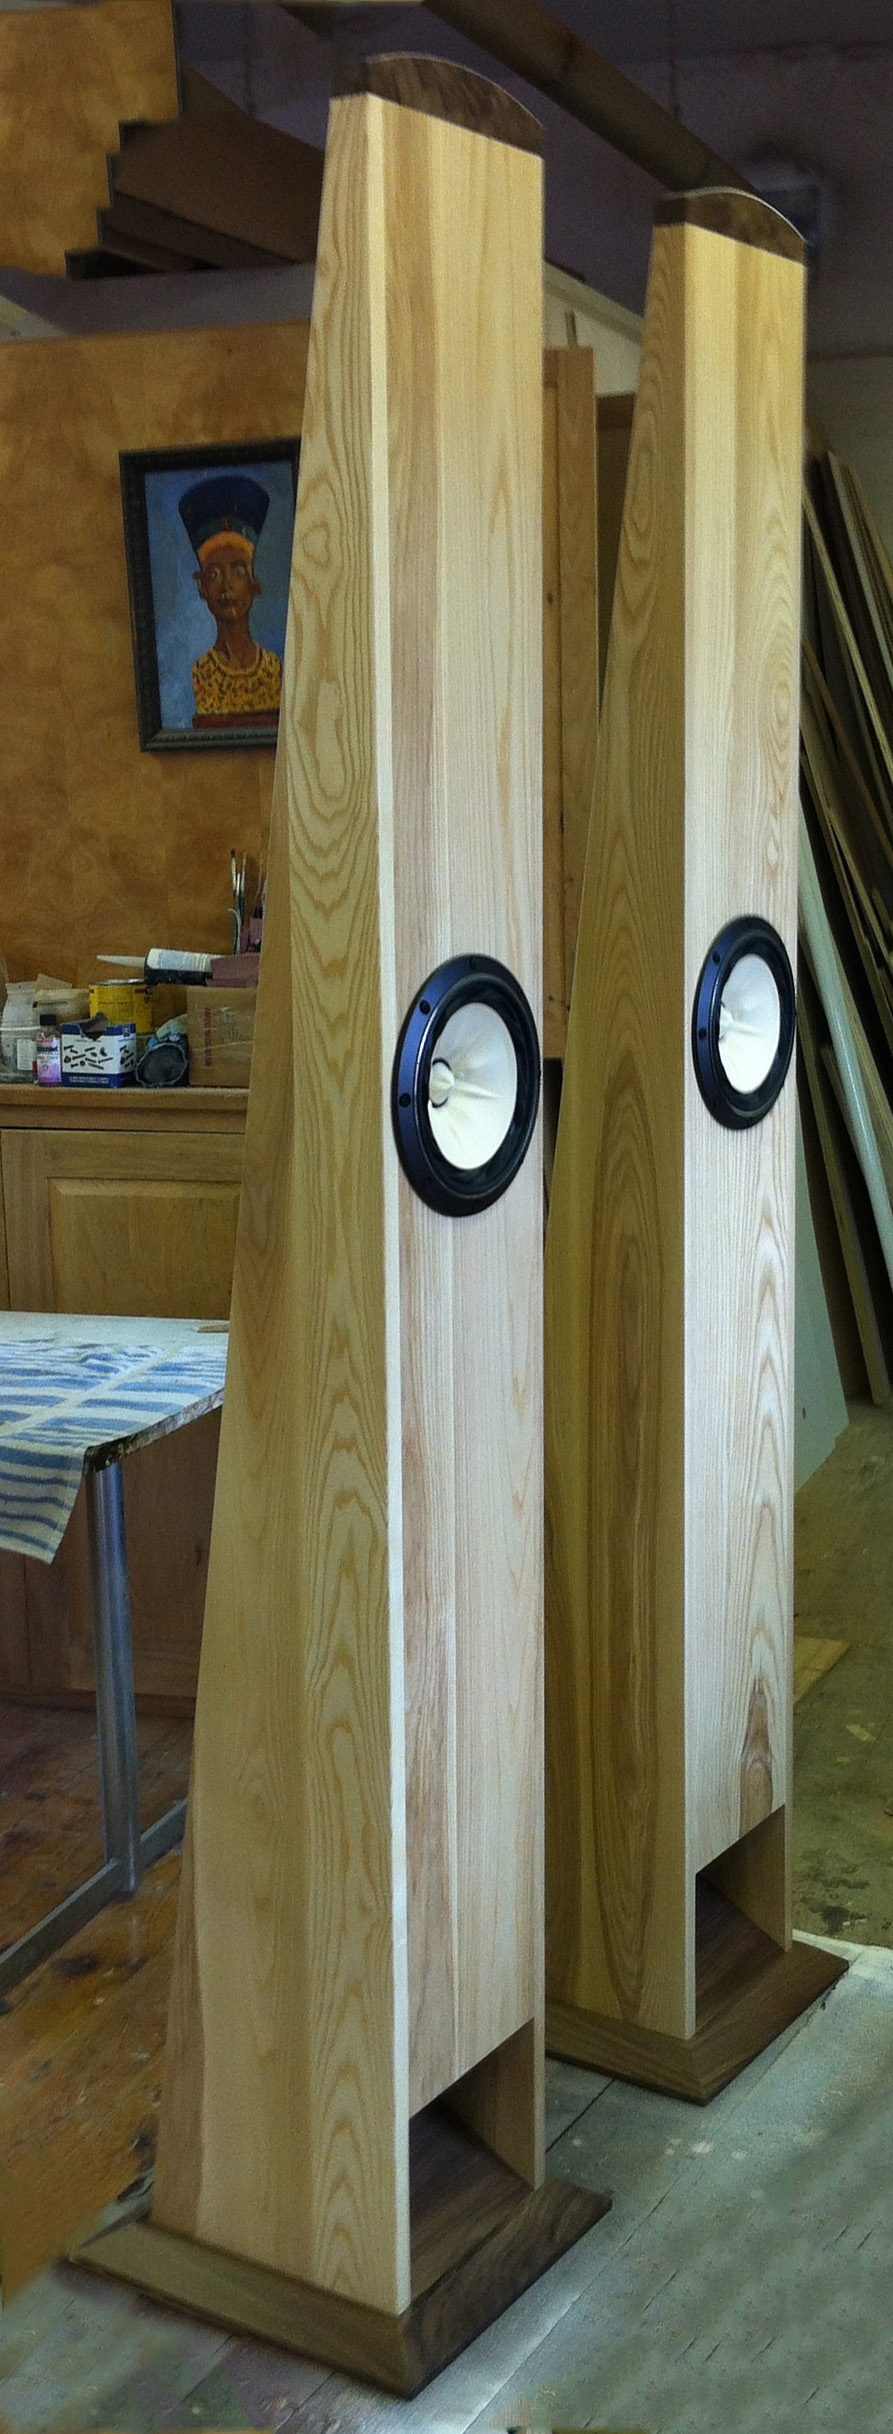 Voigt Pipes | Custom-made speakers and 